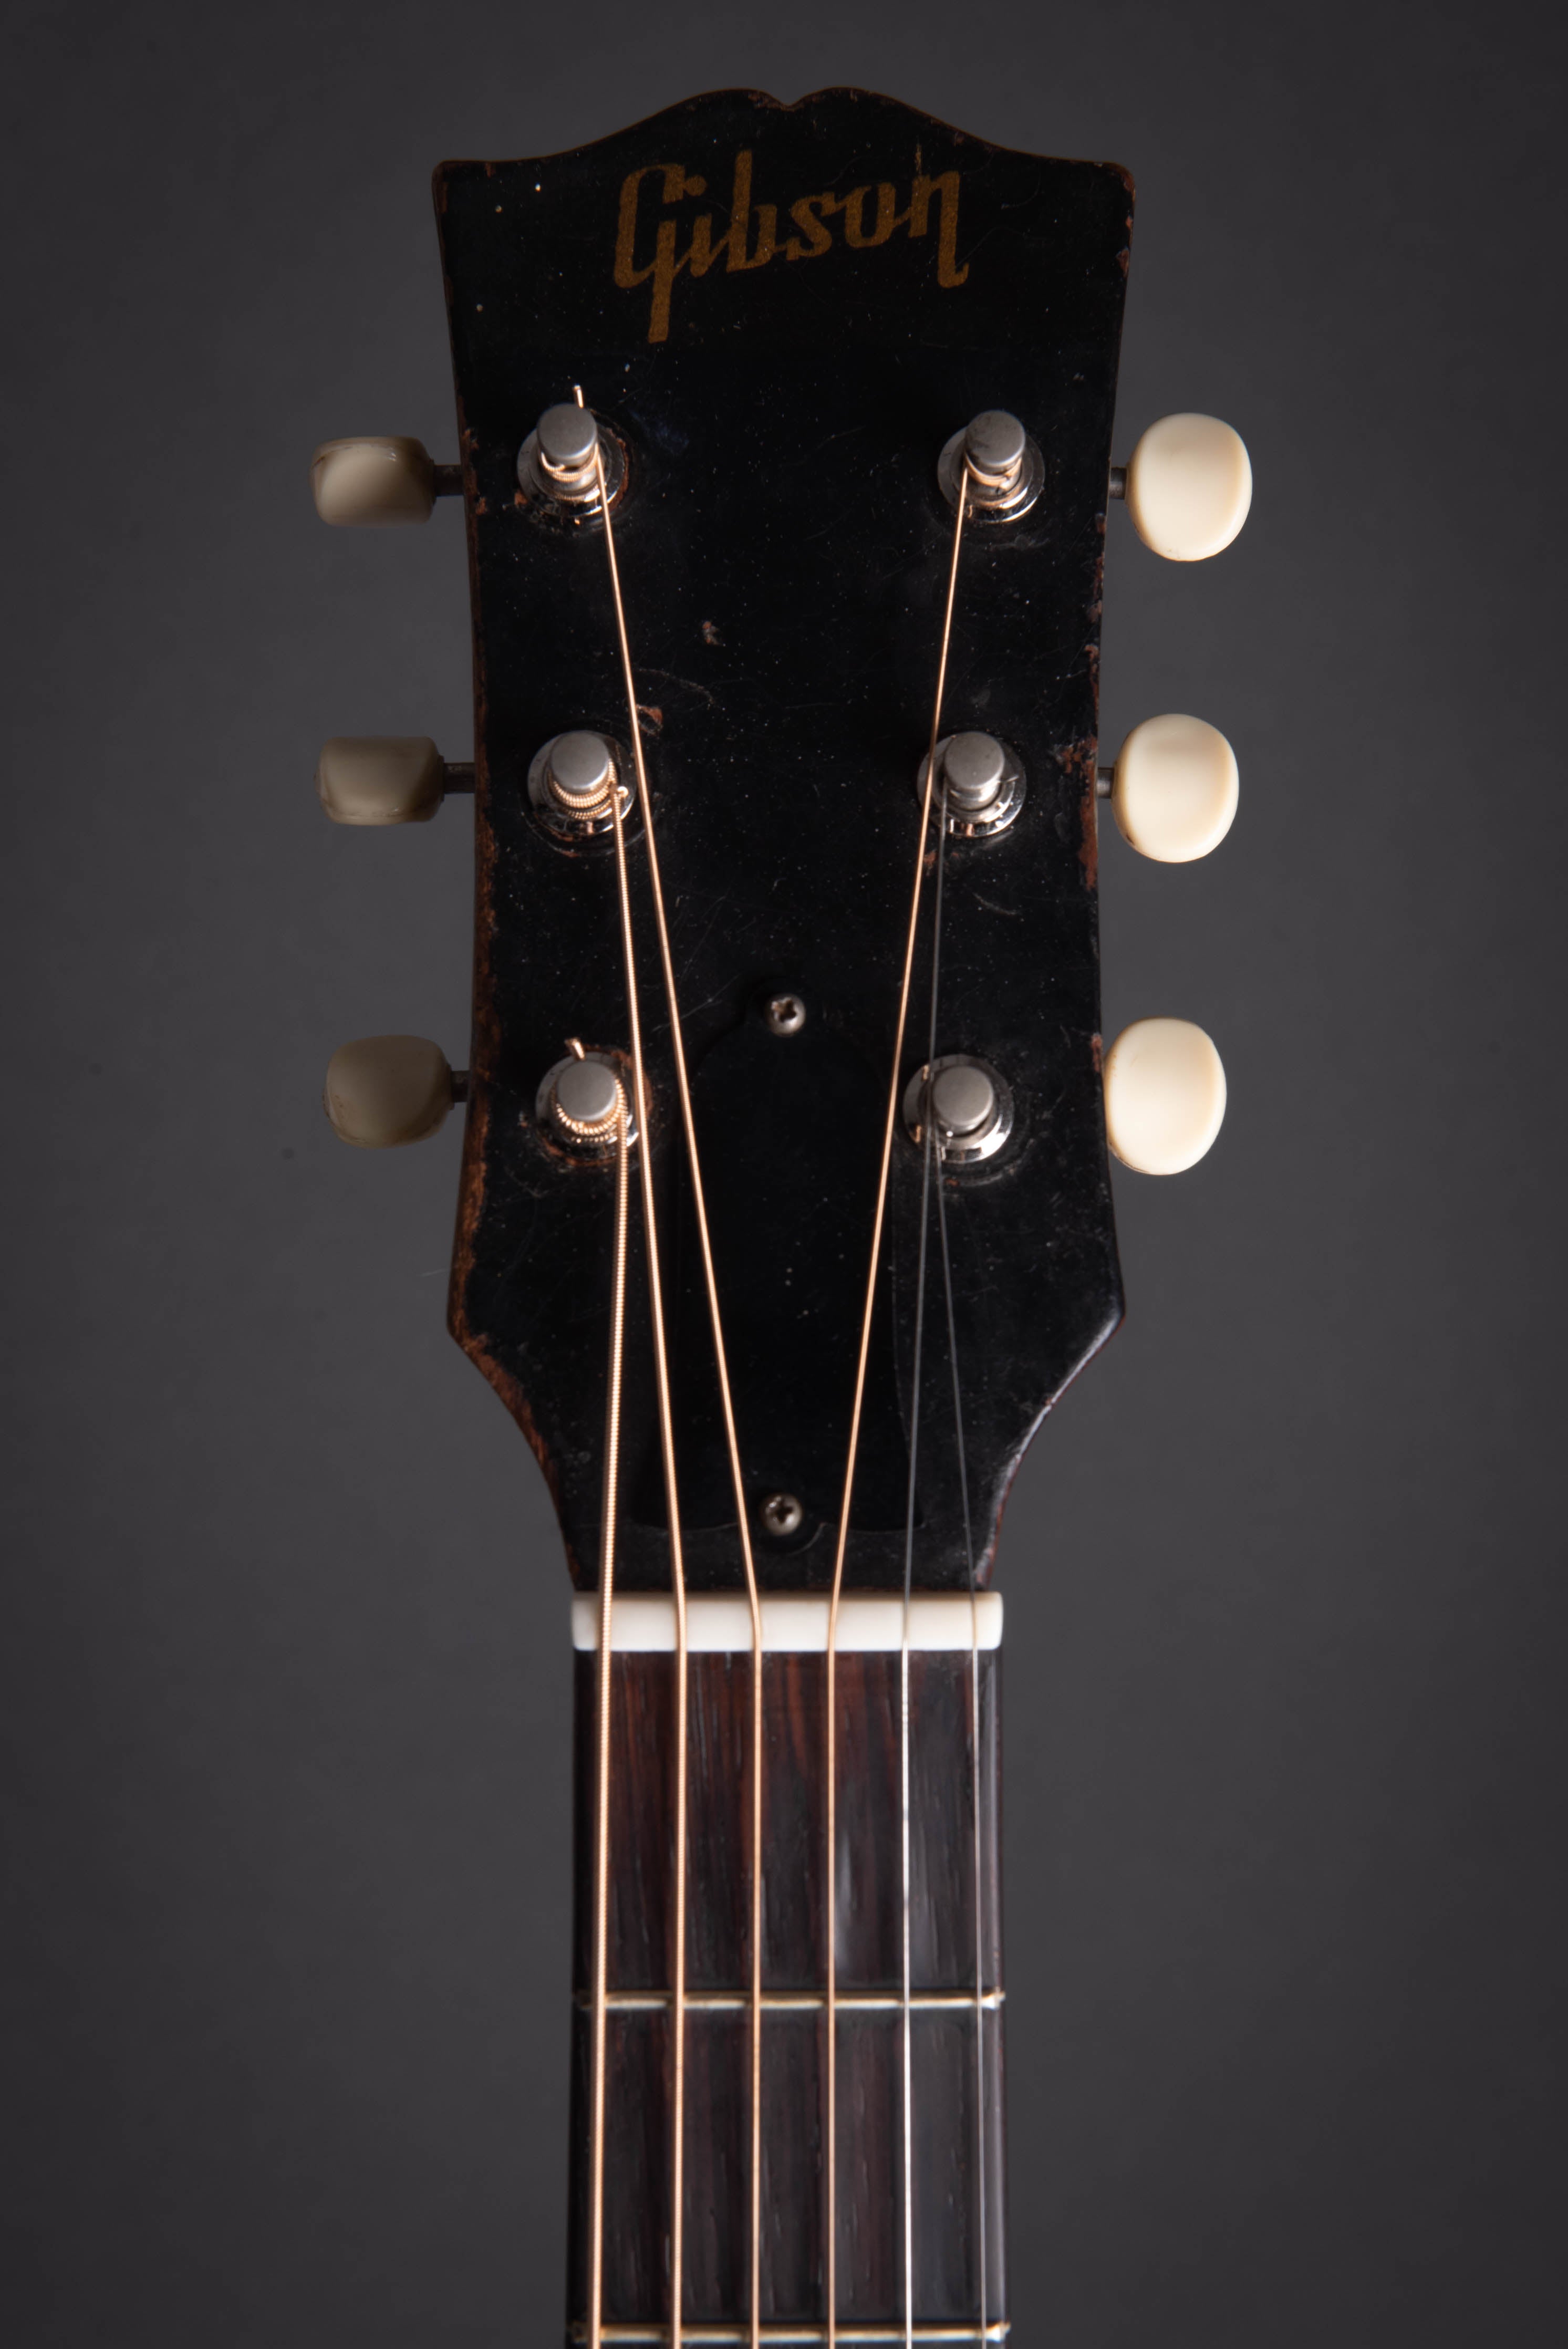 1951 Gibson J-50 Acoustic Guitar